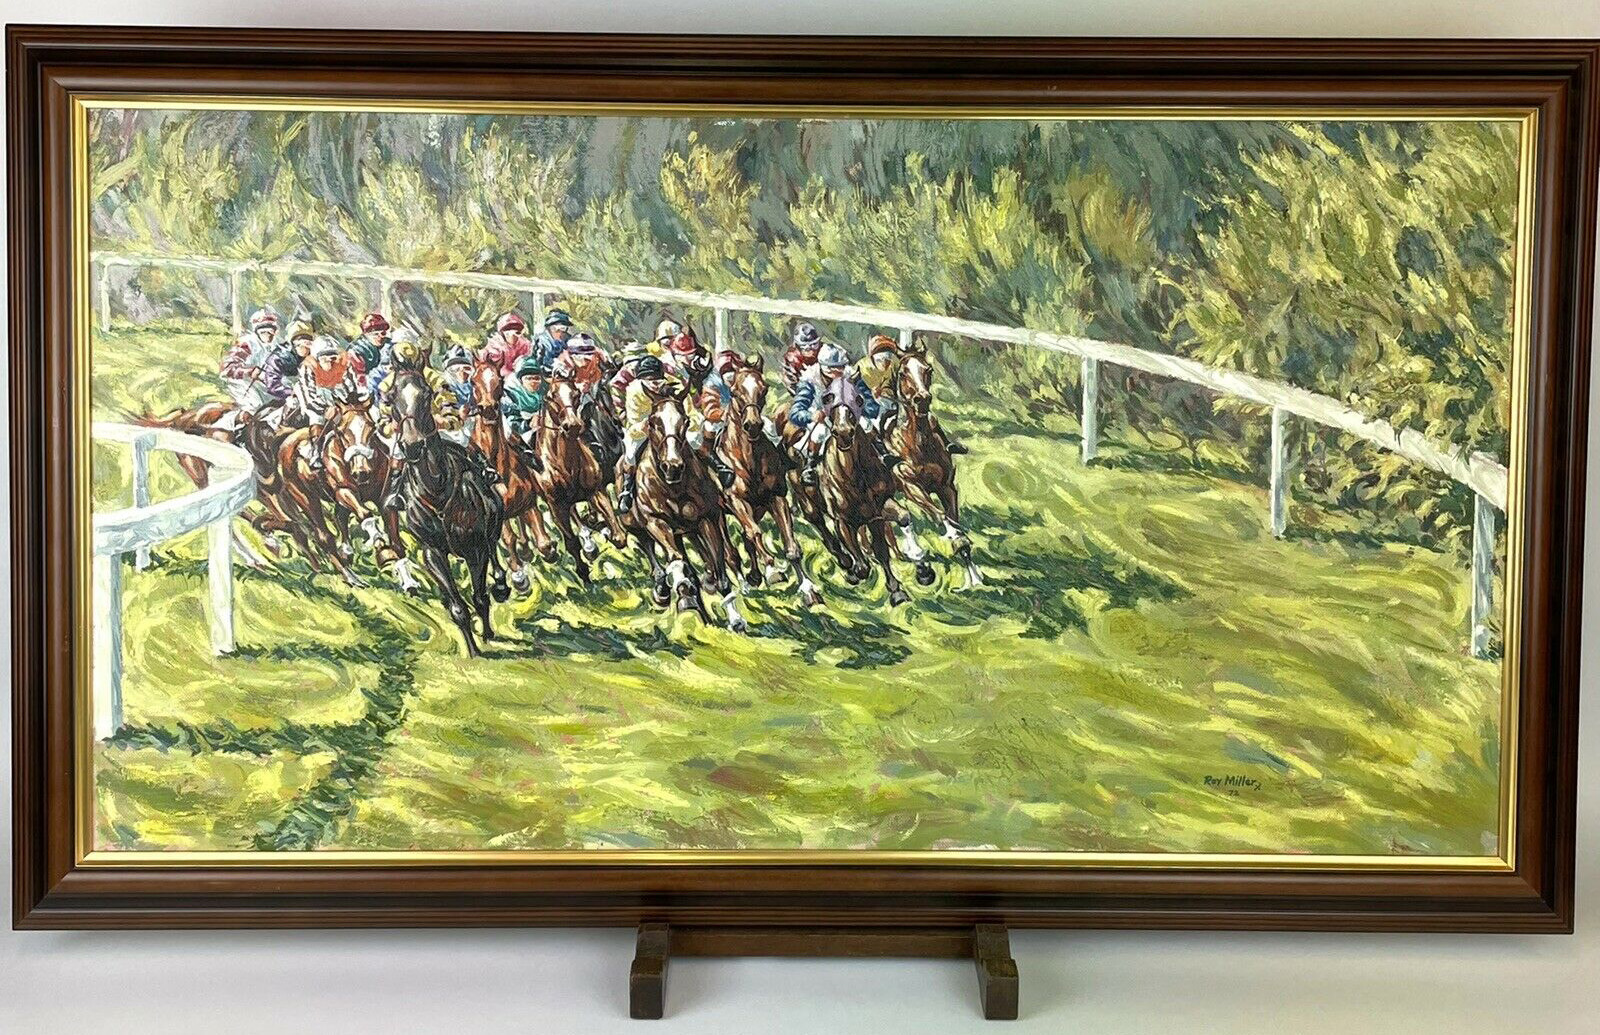 Roy Miller 1972 Rounding The Bend Horse Racing Oil On Canvas 96cm X 54.5cm